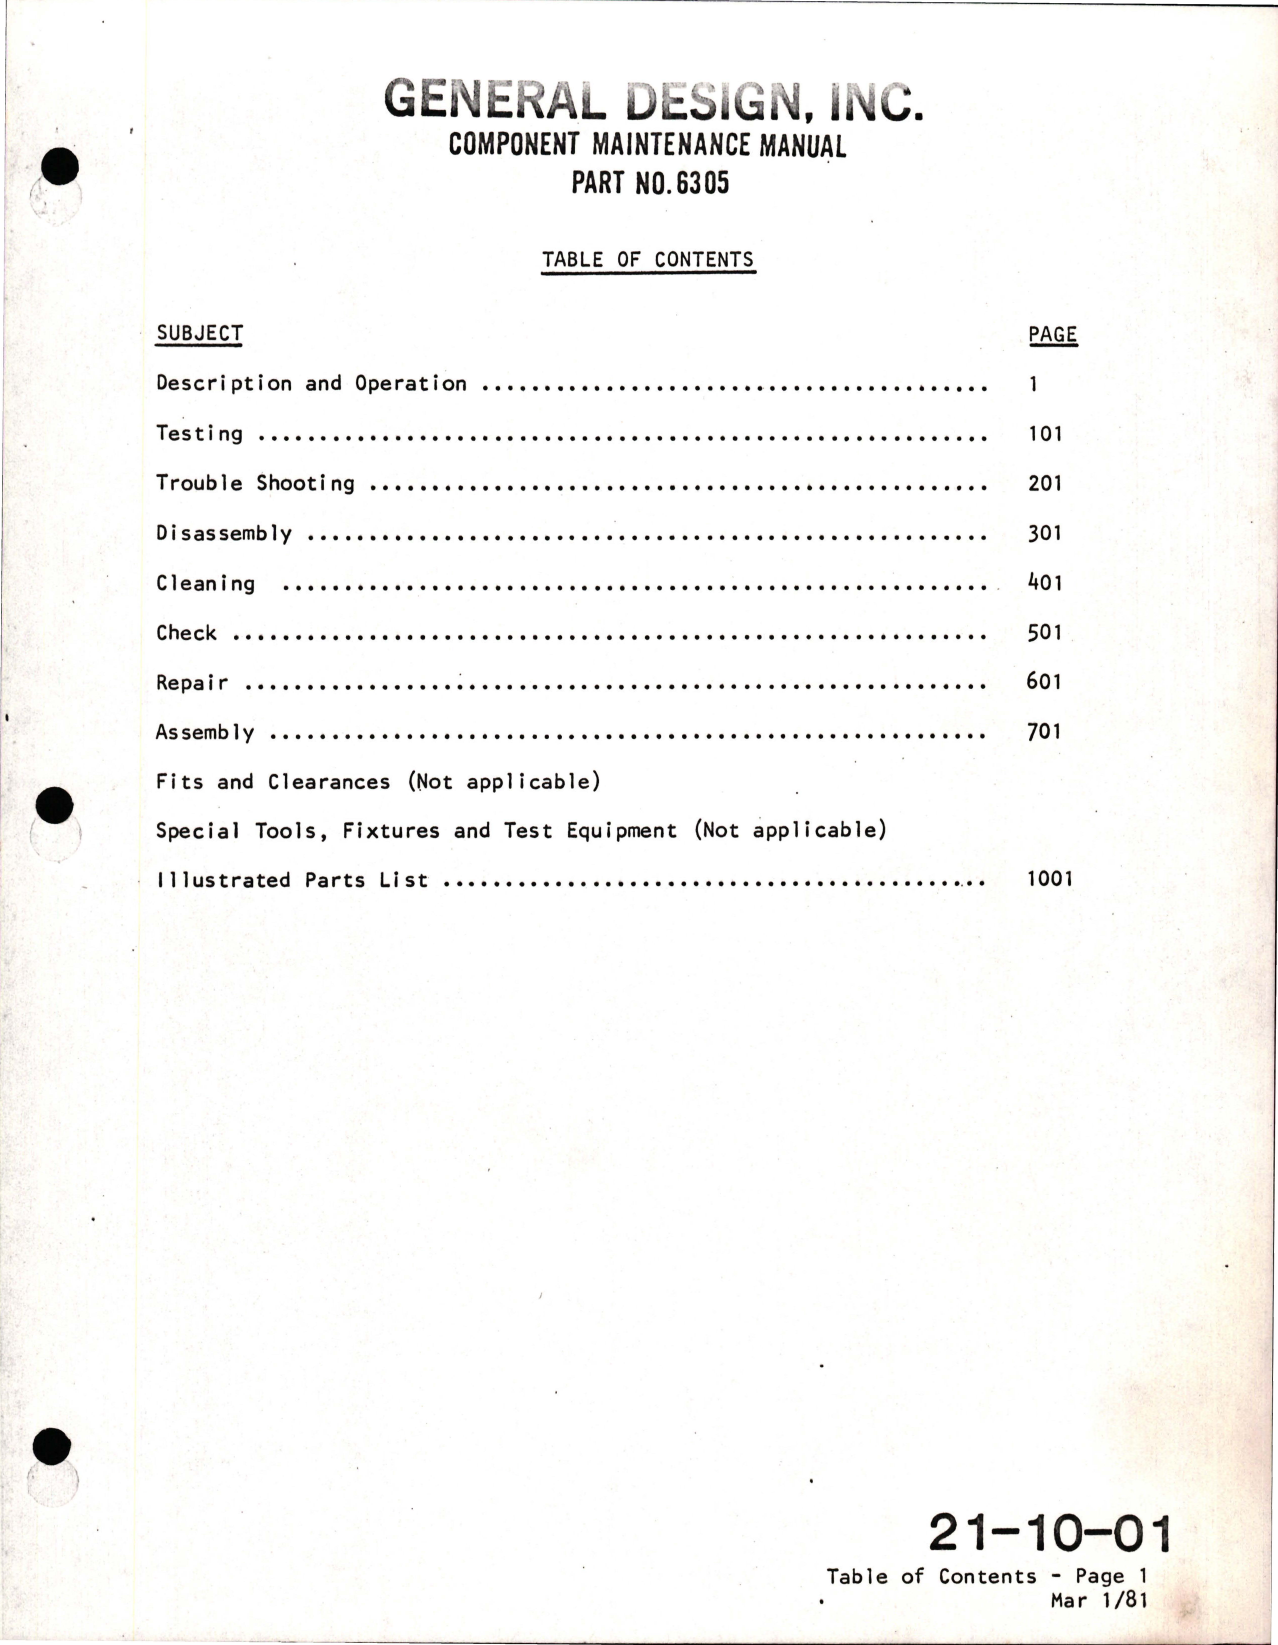 Sample page 5 from AirCorps Library document: Maintenance Manual with Illustrated Parts List for  DC Motor - Part 6305